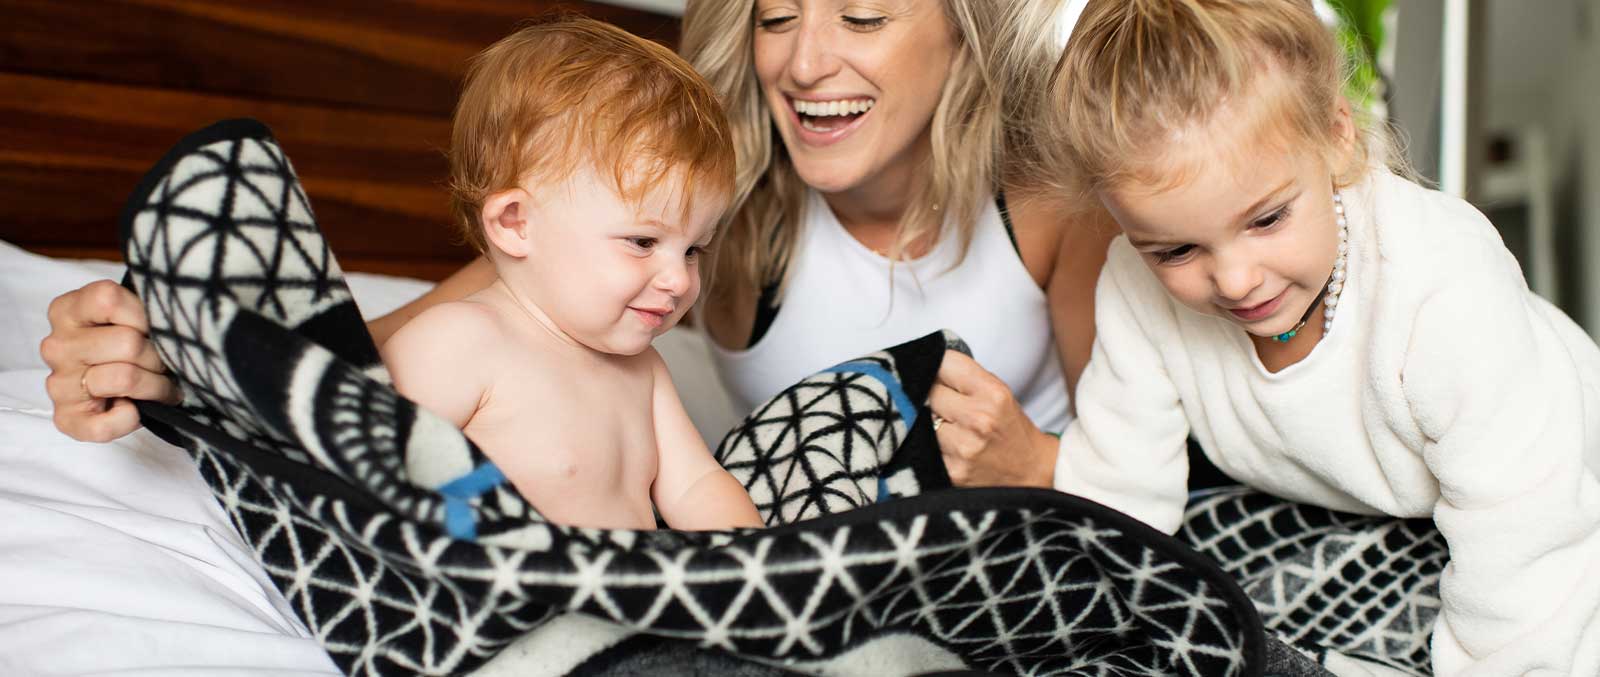 5 Best Cozy Blanket for any Occasion family on bed laughing and loving blanket